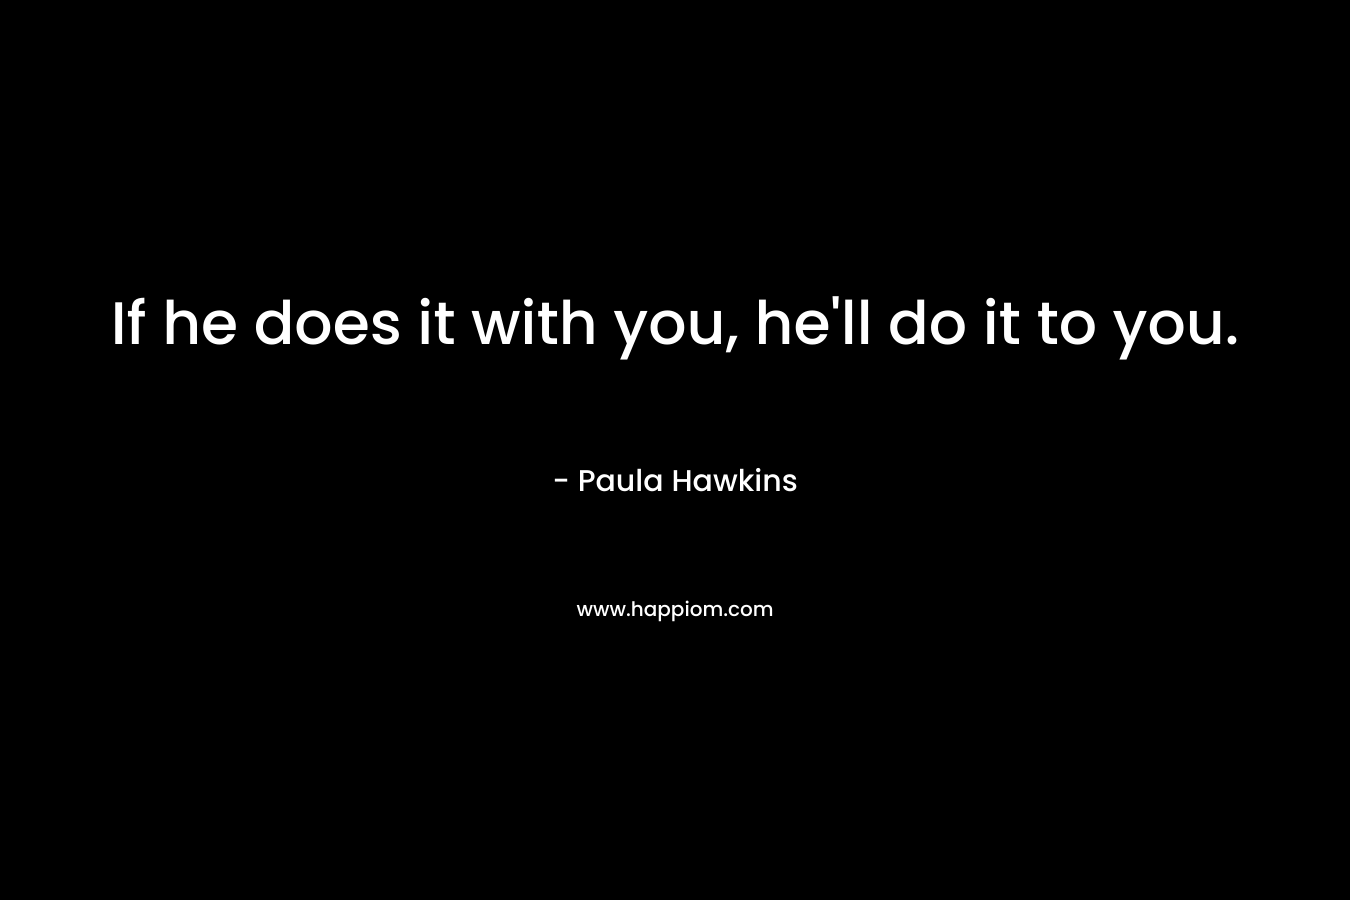 If he does it with you, he’ll do it to you. – Paula Hawkins